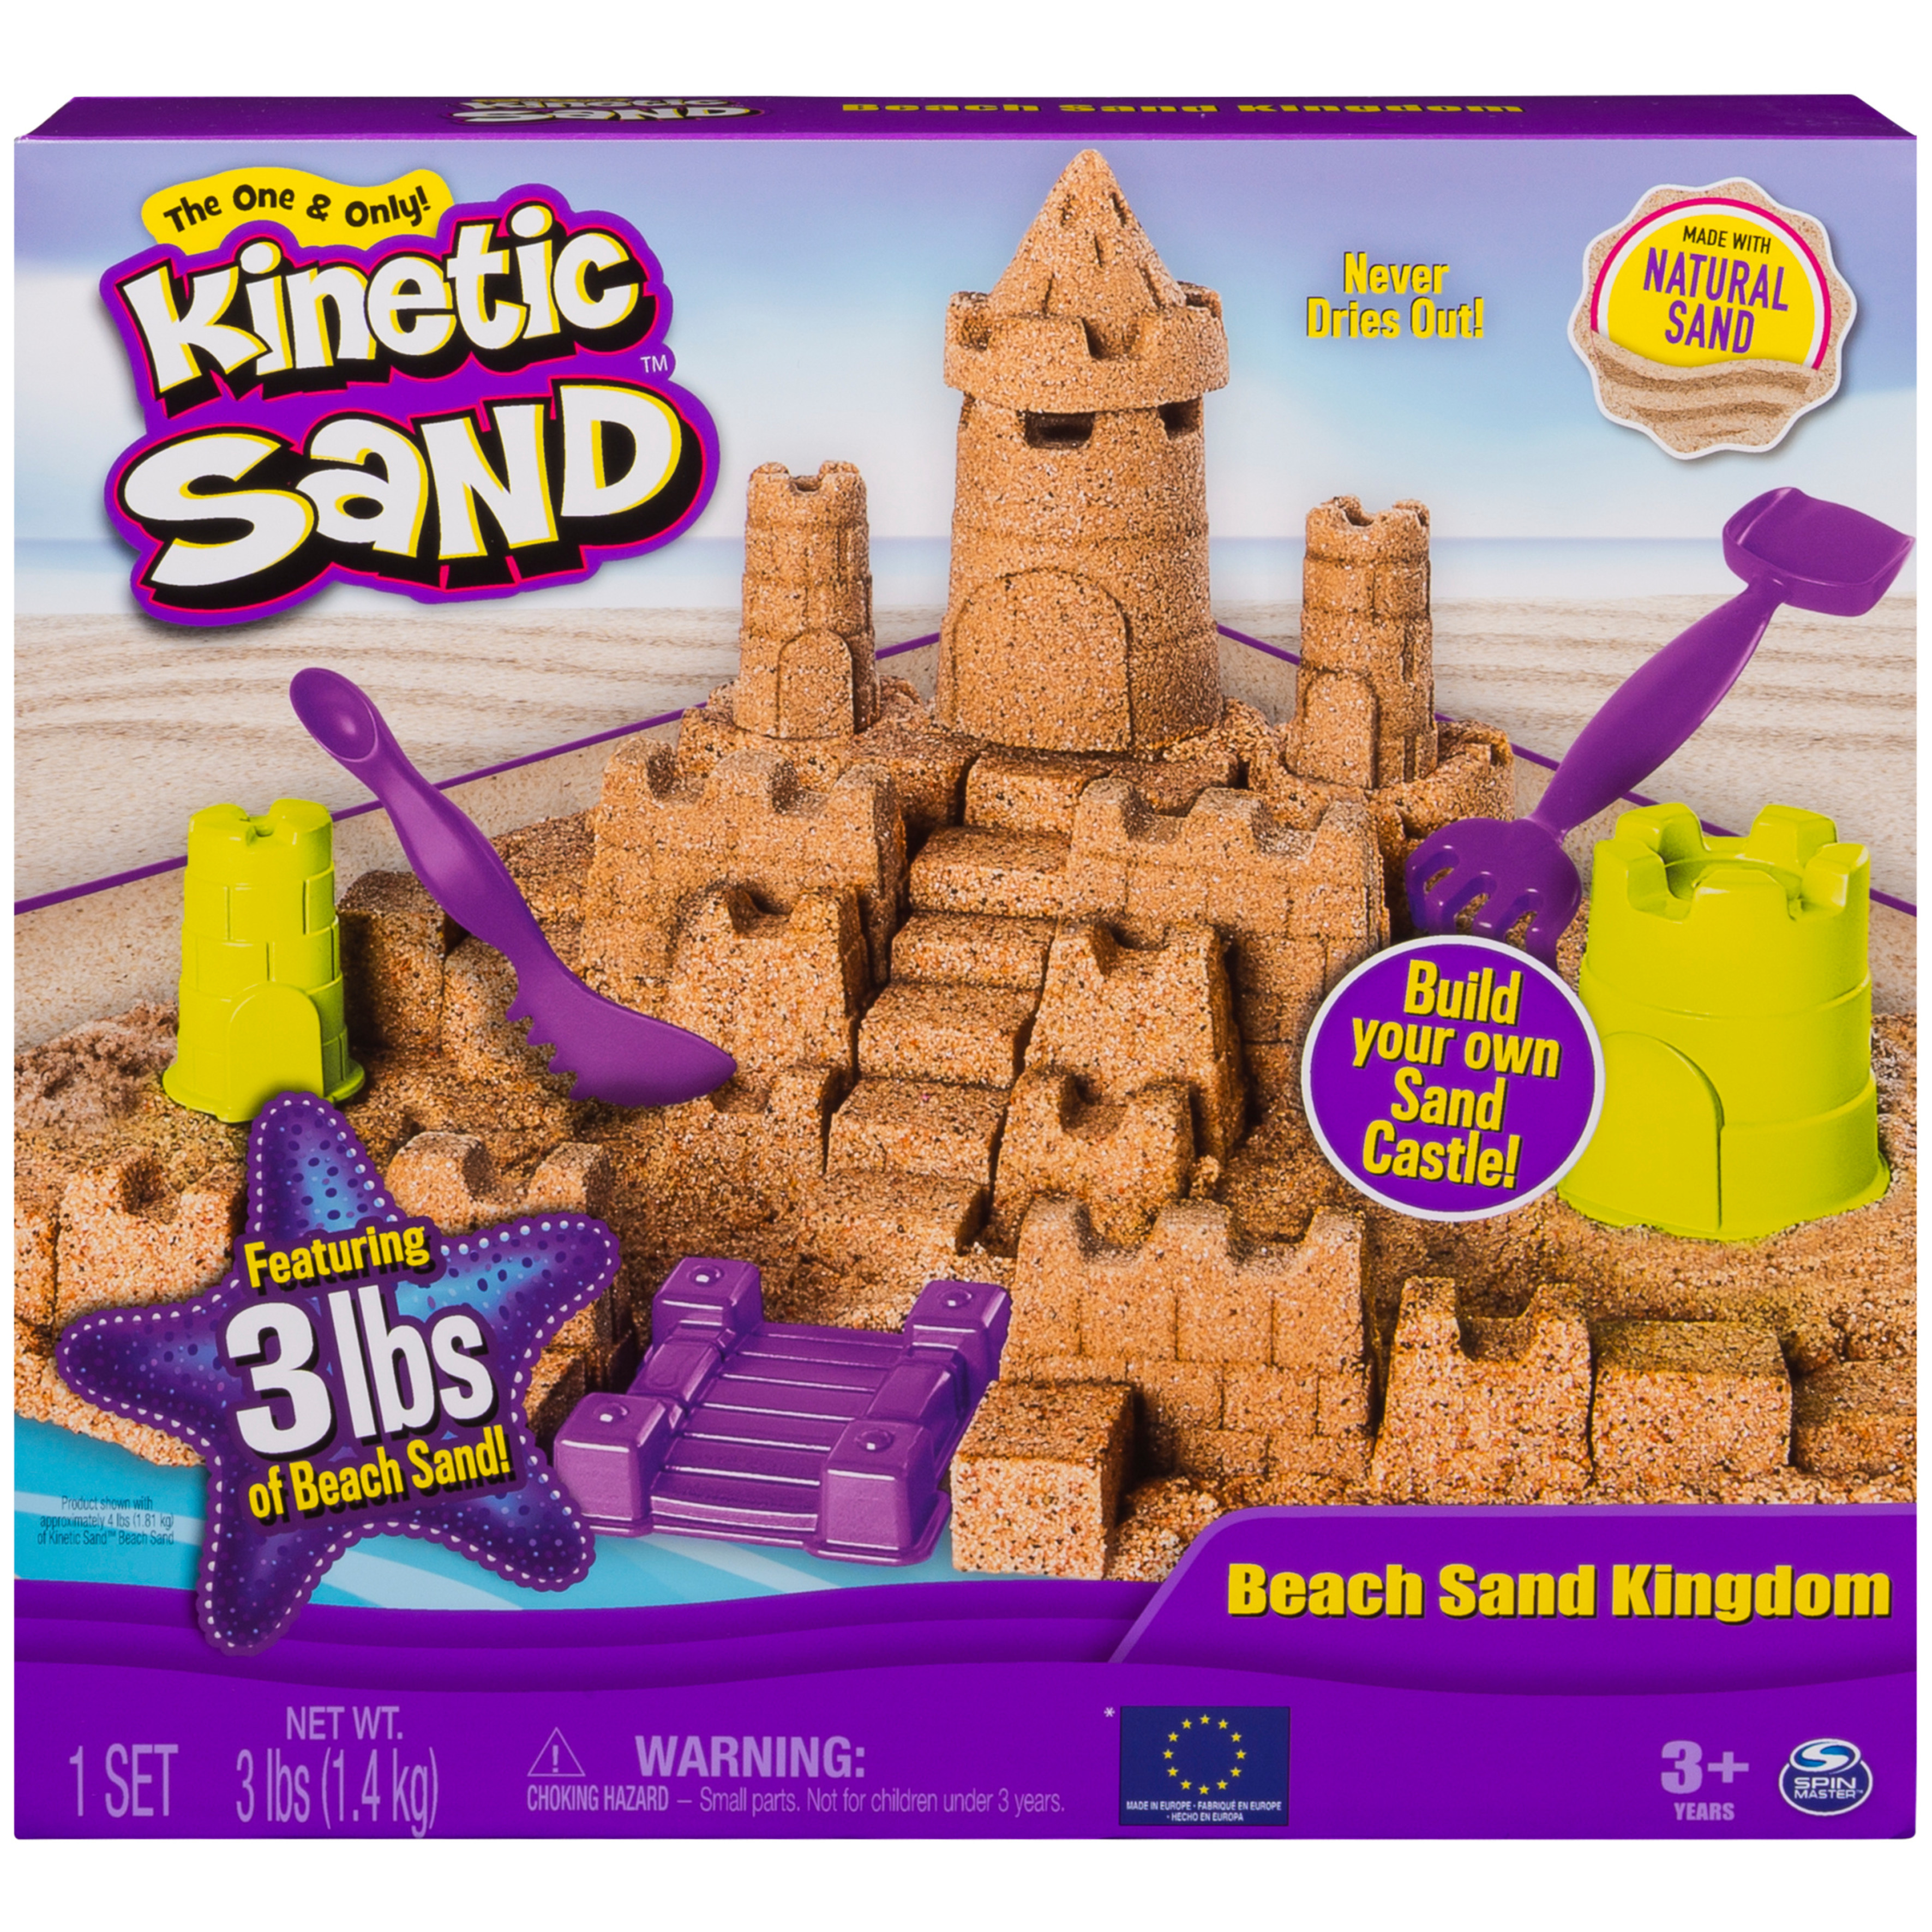 Kinetic Sand Beach Sand Kingdom Playset with 3lbs of Beach Sand, includes Molds and Tools, Play Sand Sensory Toys for Kids Ages 3 and up - image 1 of 9